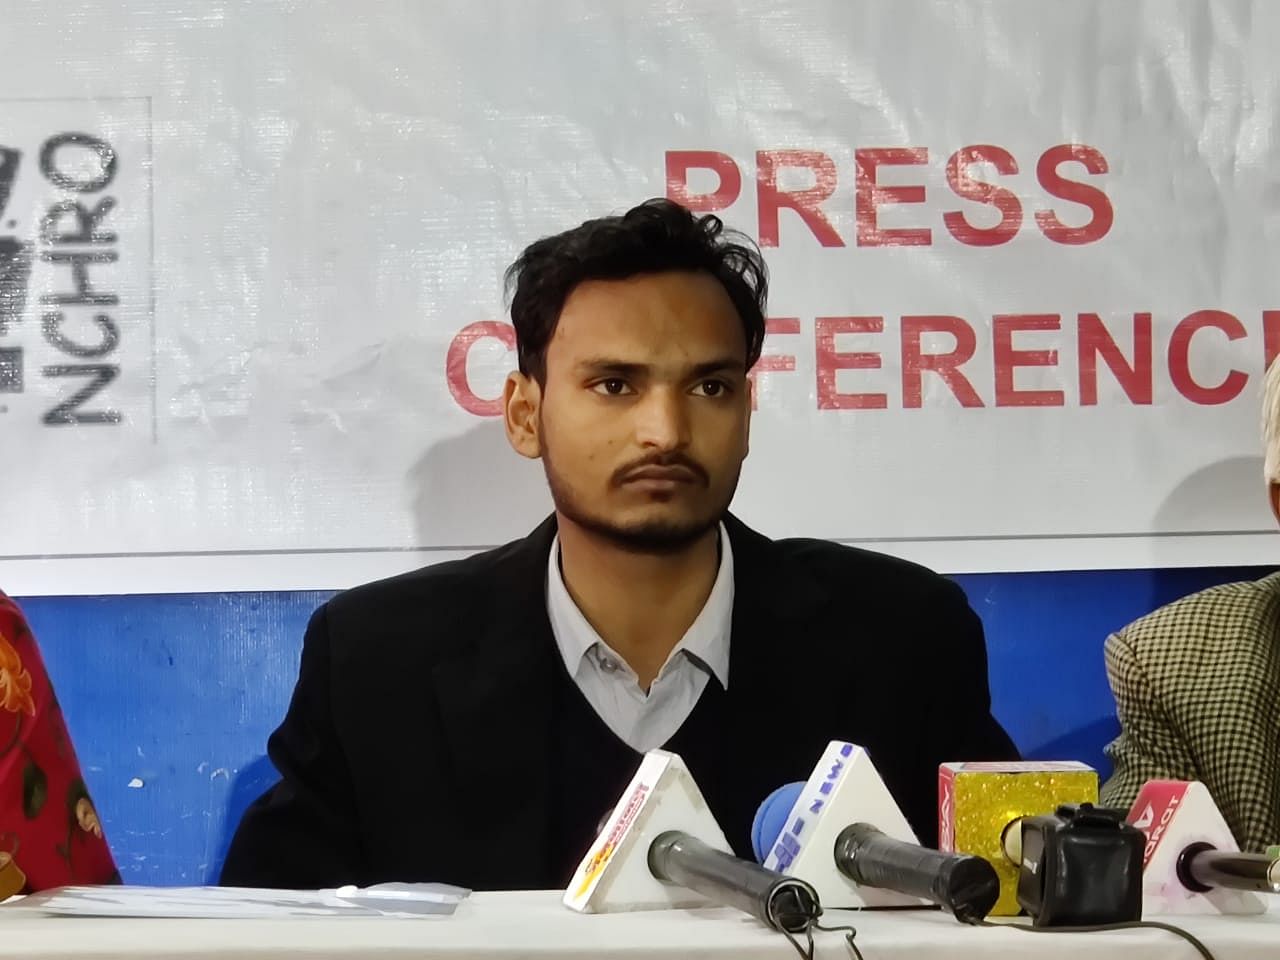 According to the Shamli police station, Faizal along with three other men were involved in inciting violence and distributing objectionable messages on paper. (DH Photo)